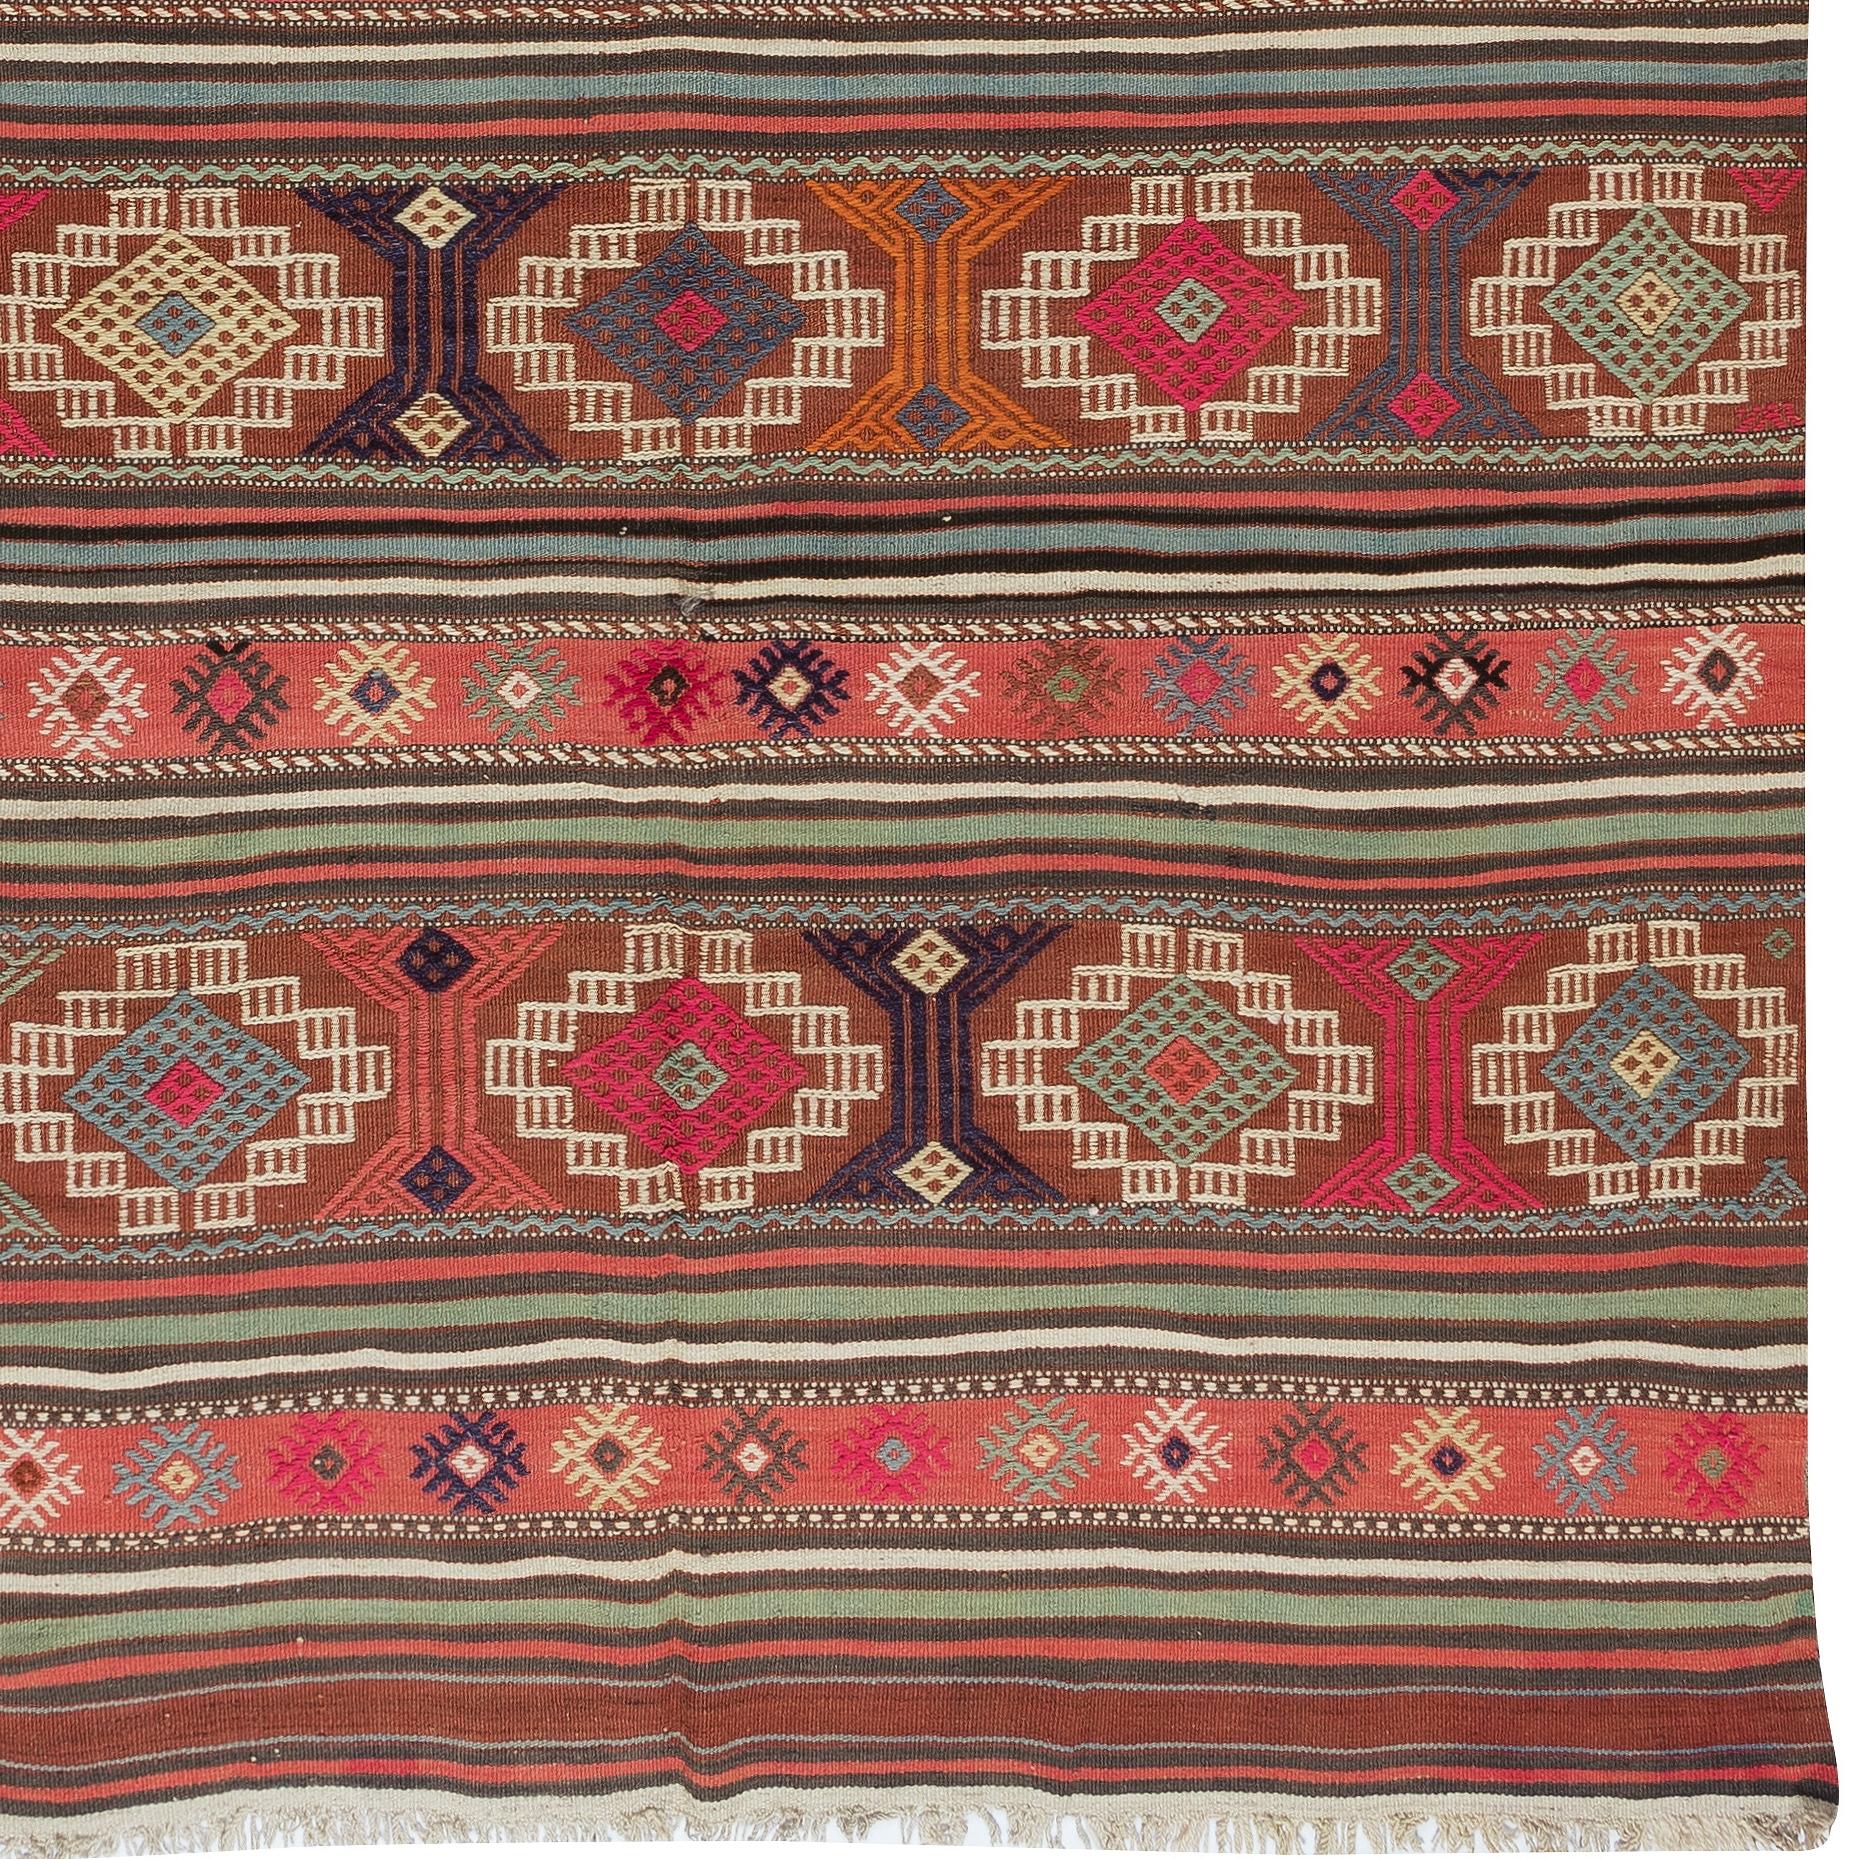 Turkish 5x8 Ft Multicolor Handmade Wool Kilim Rug From Central Anatolia, Turkey, 1970s For Sale